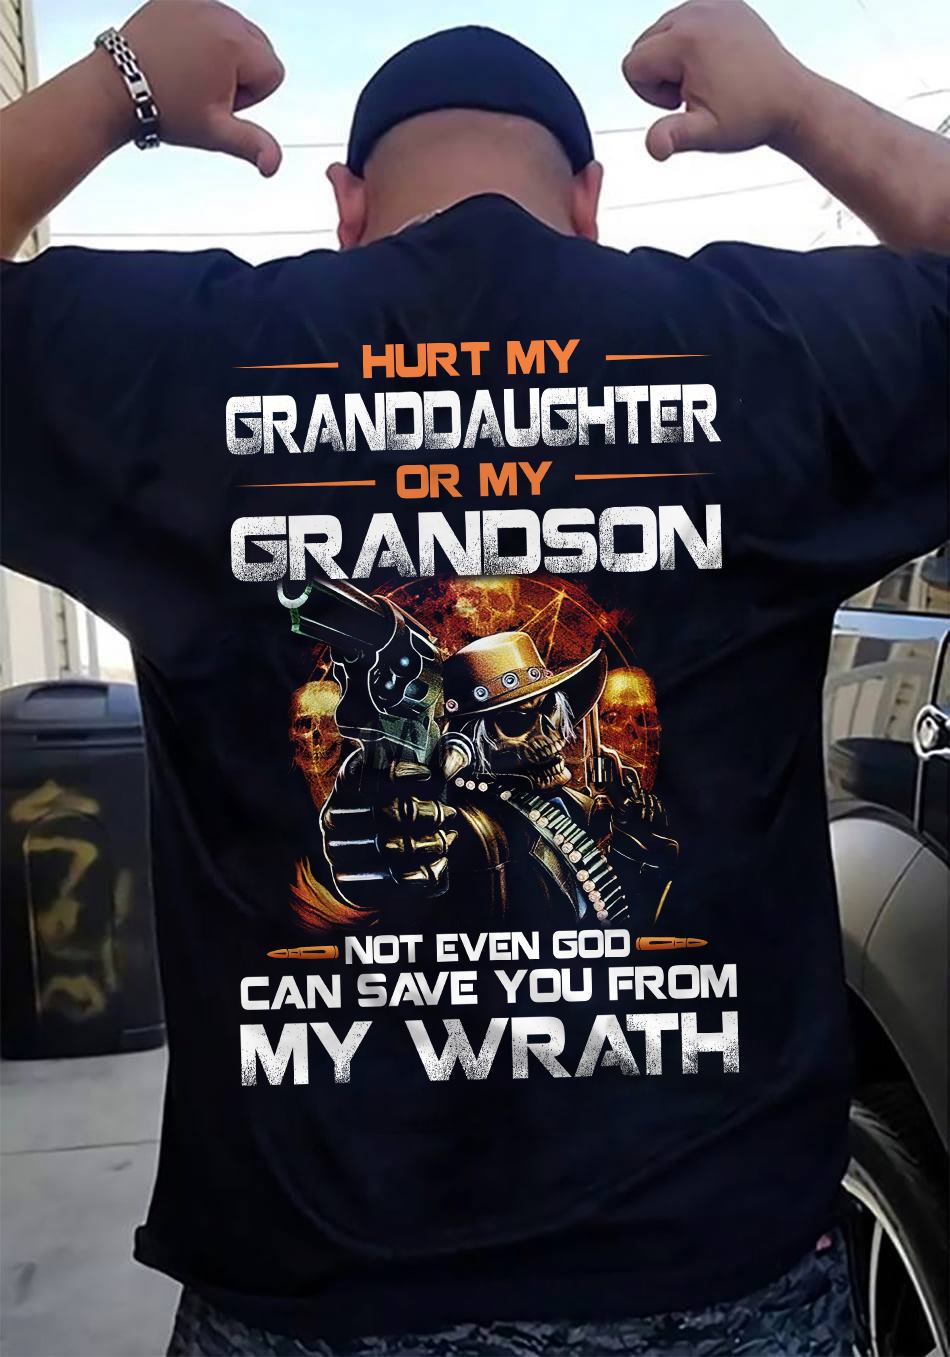 Hurt my granddaughter or my grandson not even god can save you from my wrath - Evil with gun